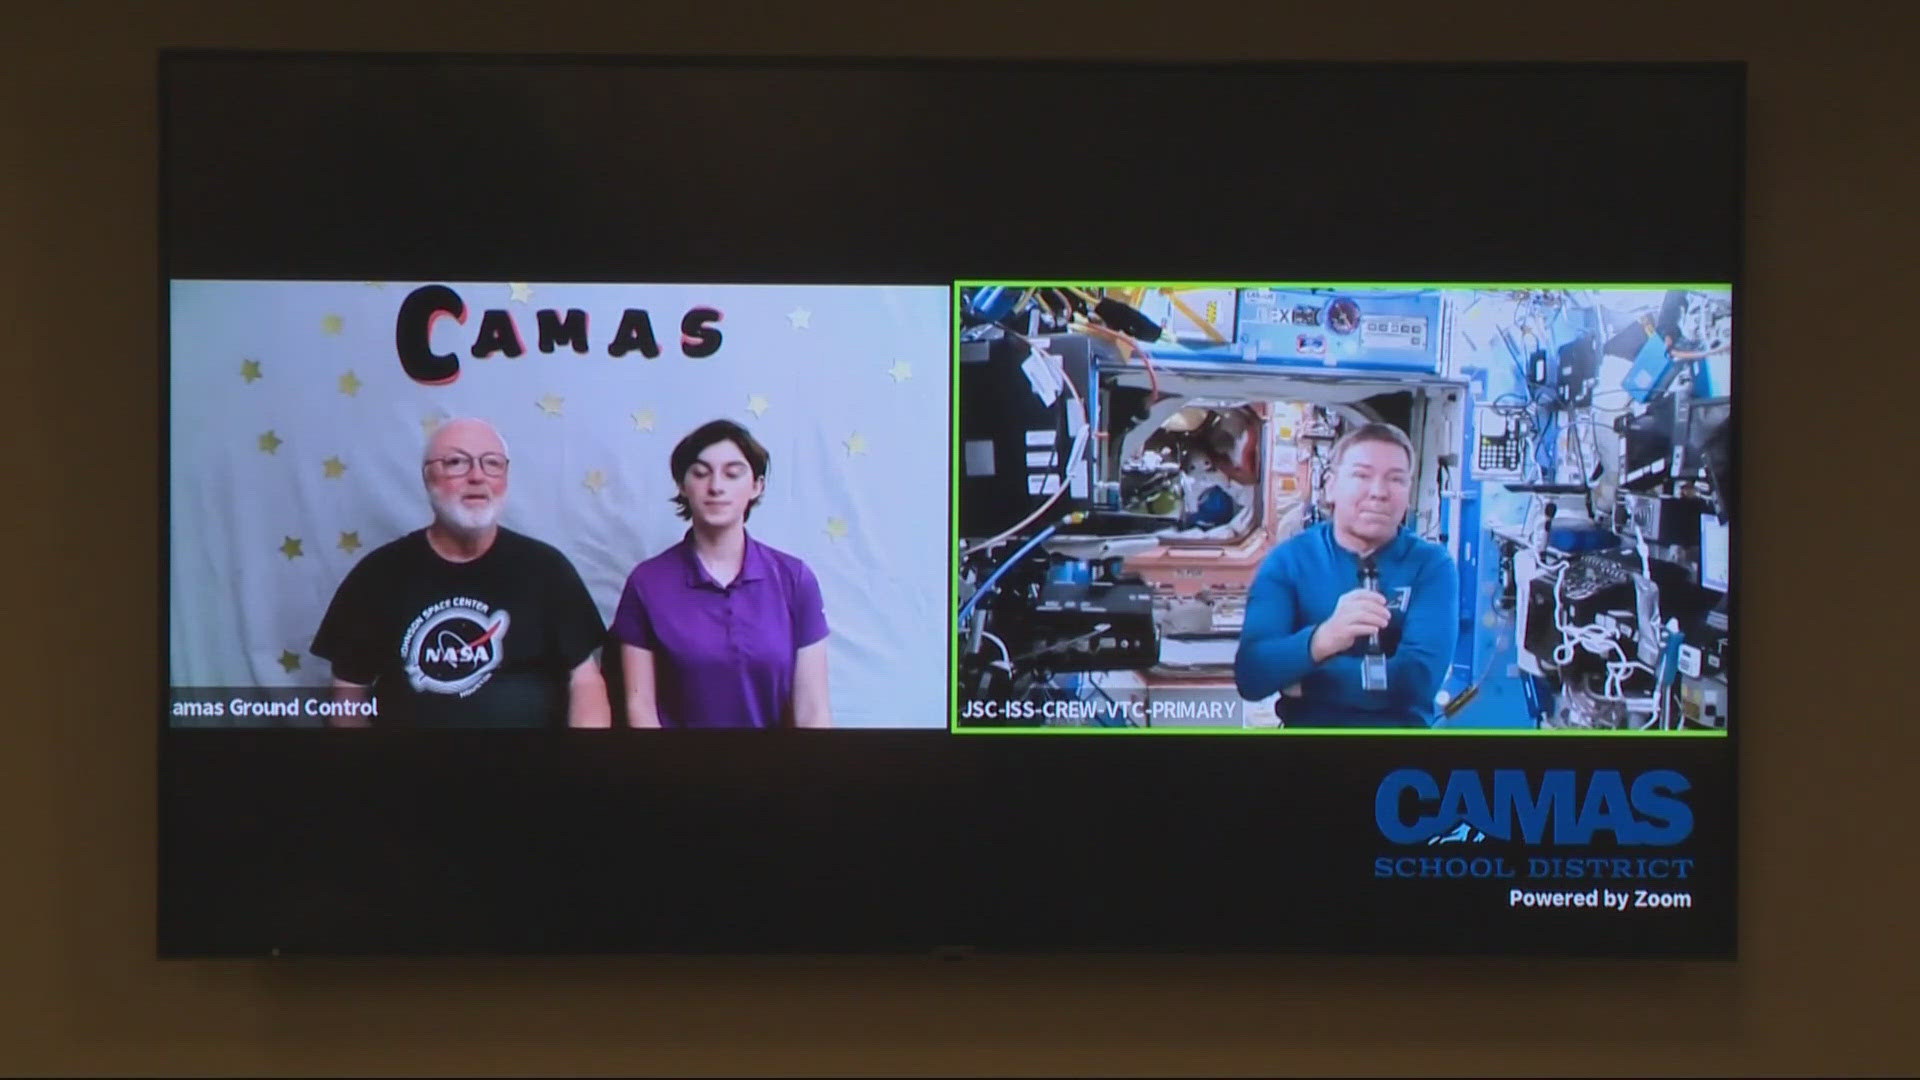 Dr. Michael Barratt is from Camas, and students Thursday got a chance to connect with him live from the International Space Station.